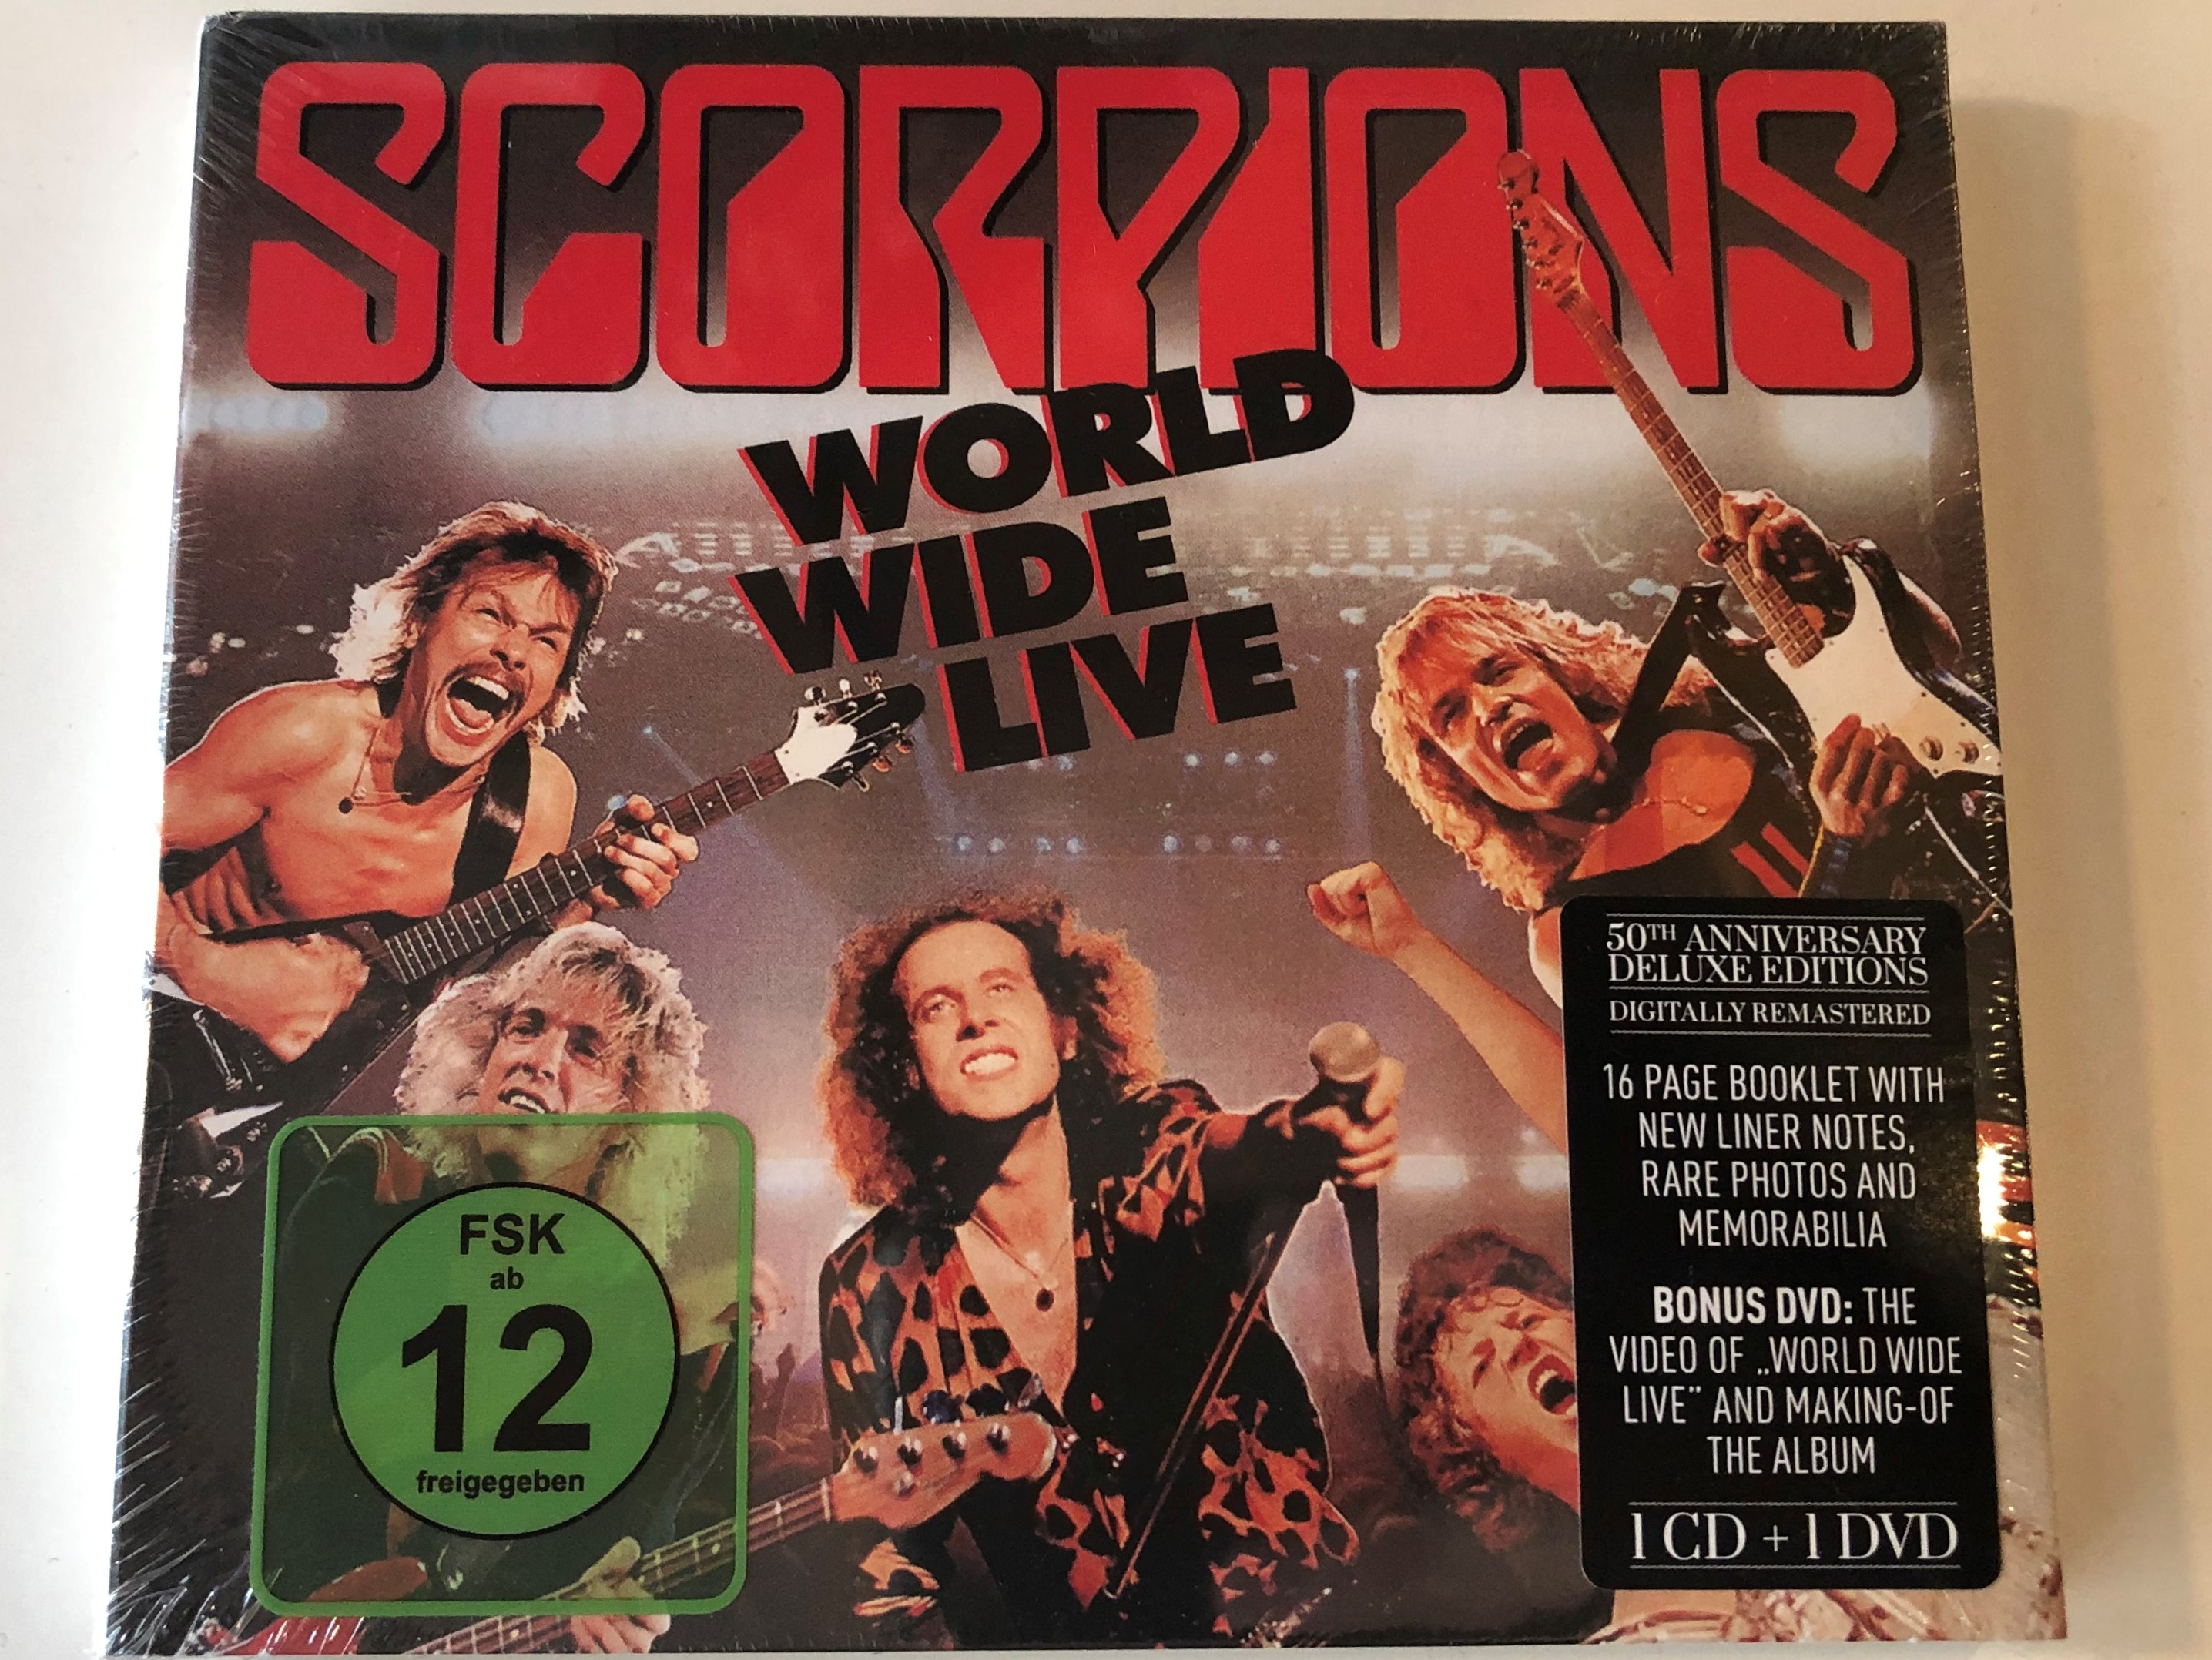 scorpions-world-wide-live-50th-anniversary-deluxe-editions-16-page-booklet-with-new-liner-notes-rare-photos-and-memorabilia-bonus-dvd-the-video-of-world-wide-live-and-making-of-the-alb-1-.jpg